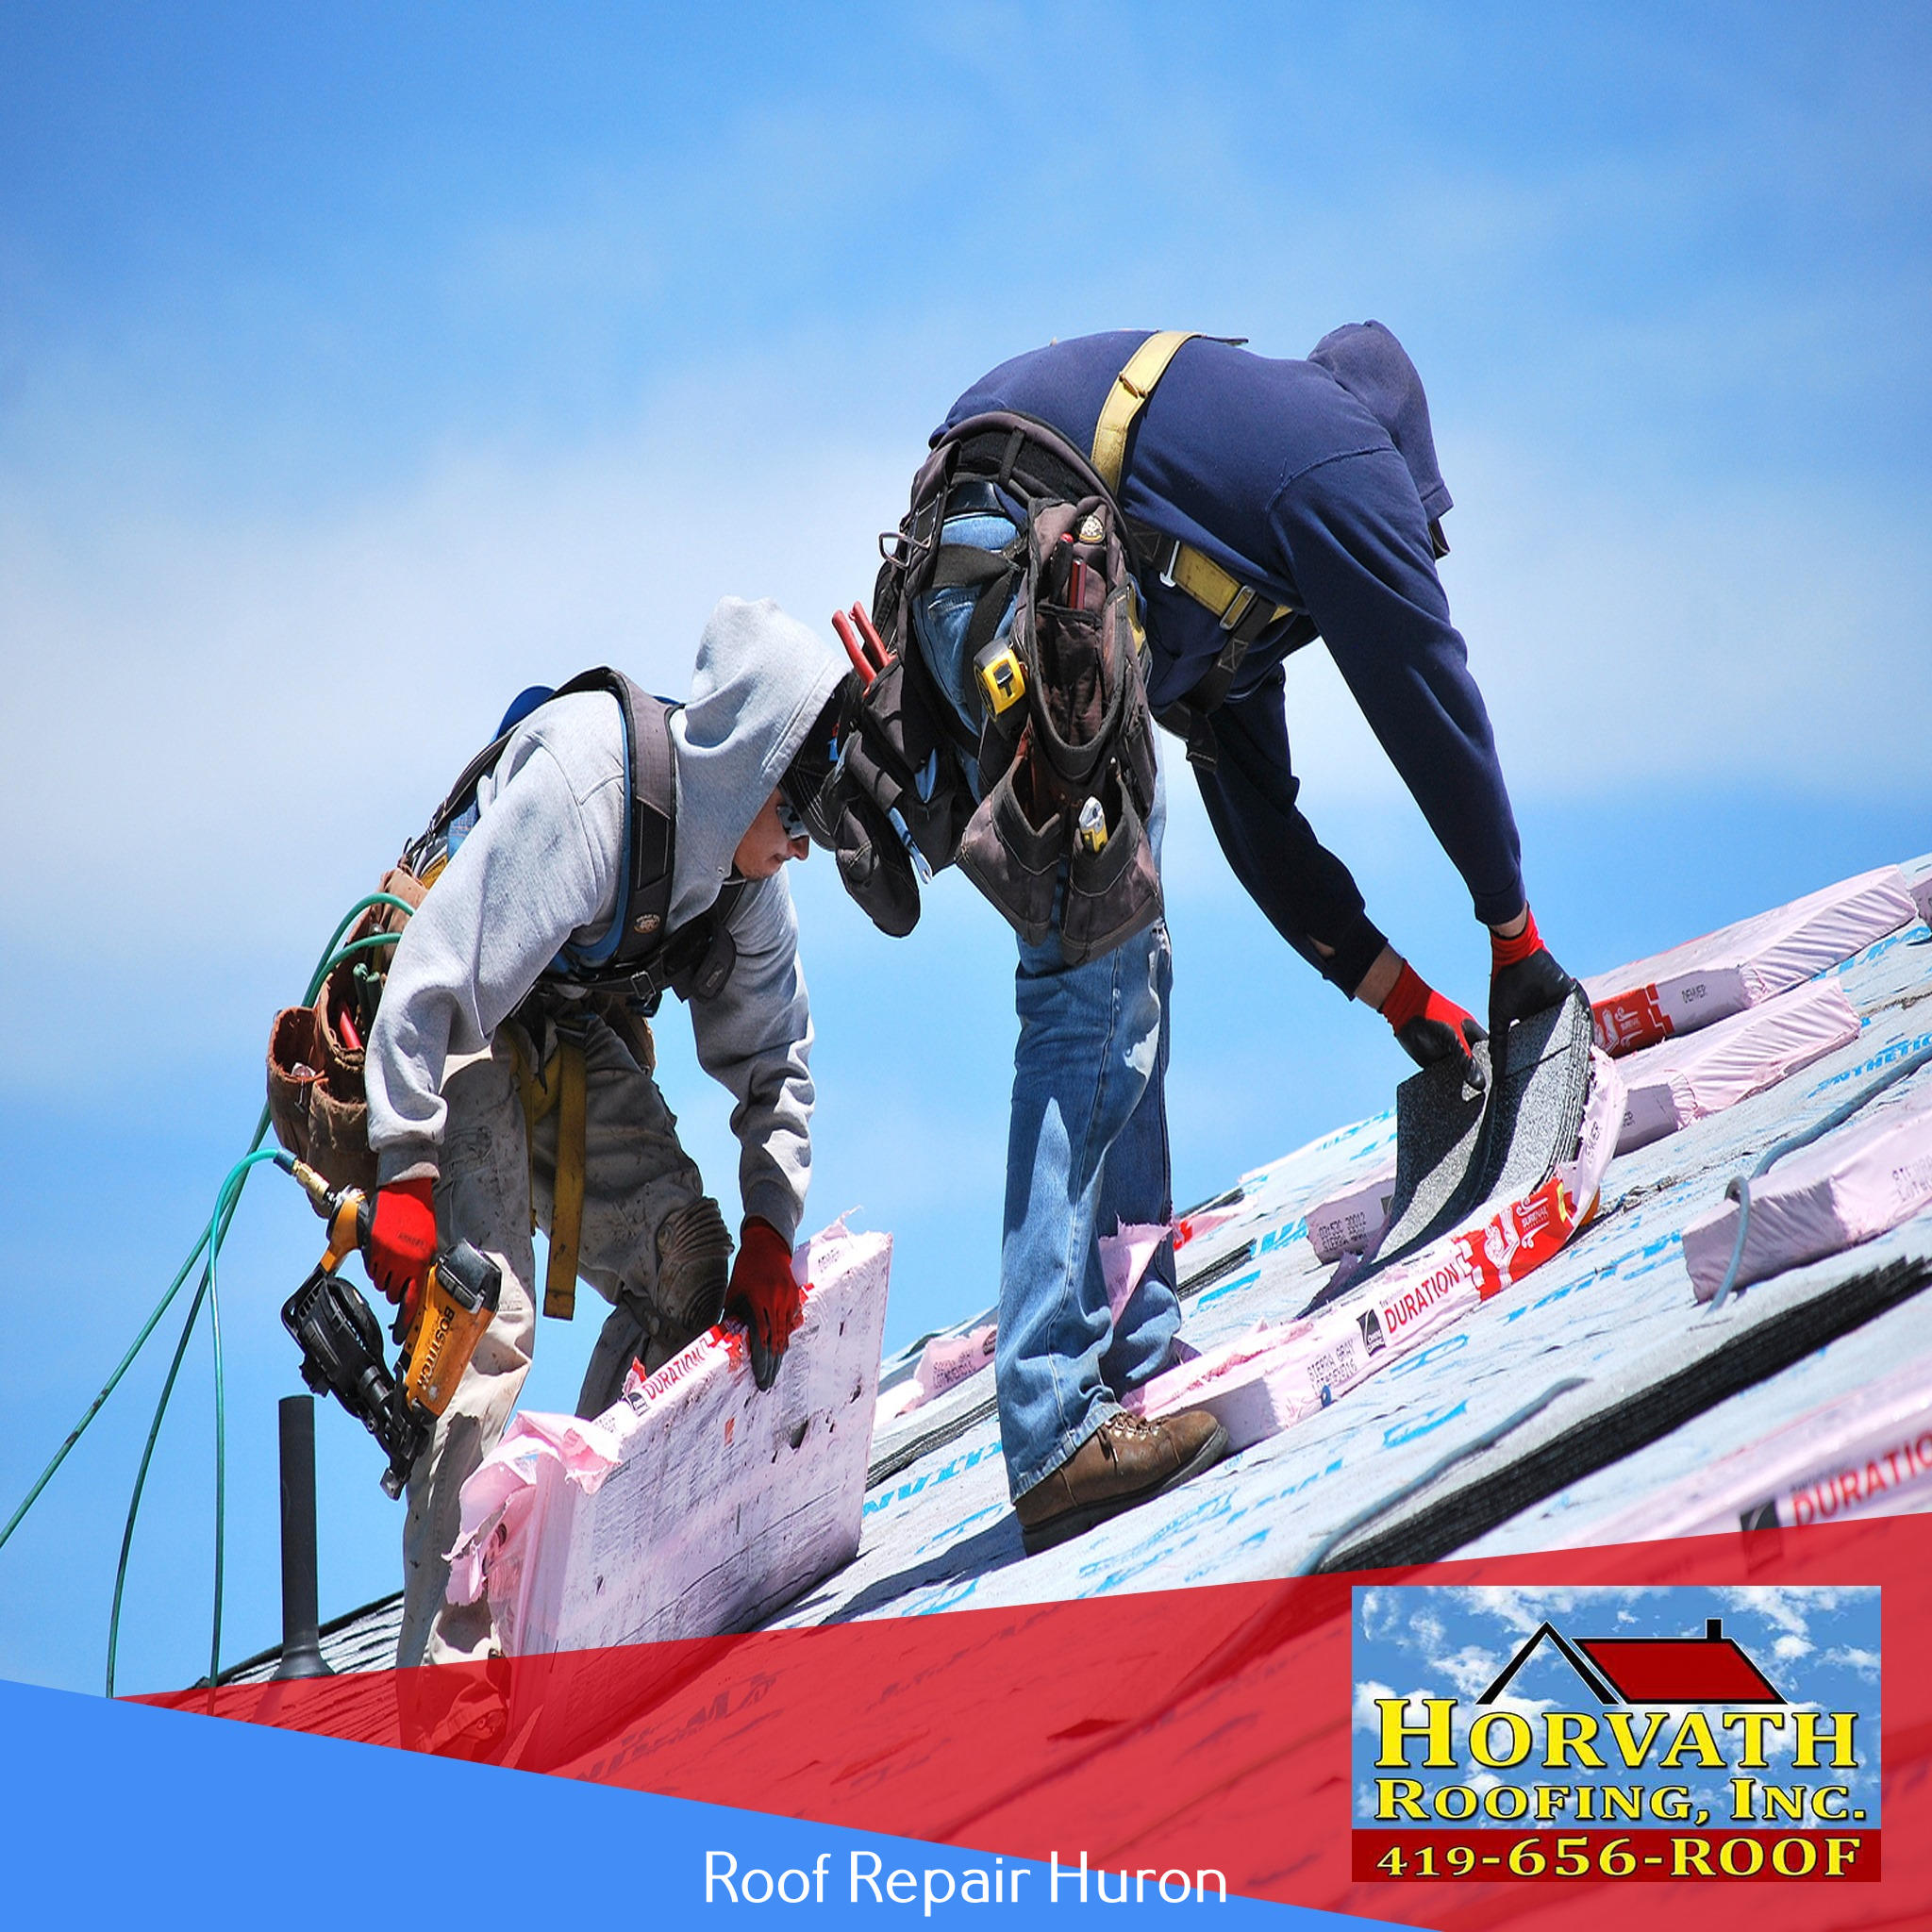 Horvath Roofing Inc. Offers Responsive and Trustworthy Roofing Services 